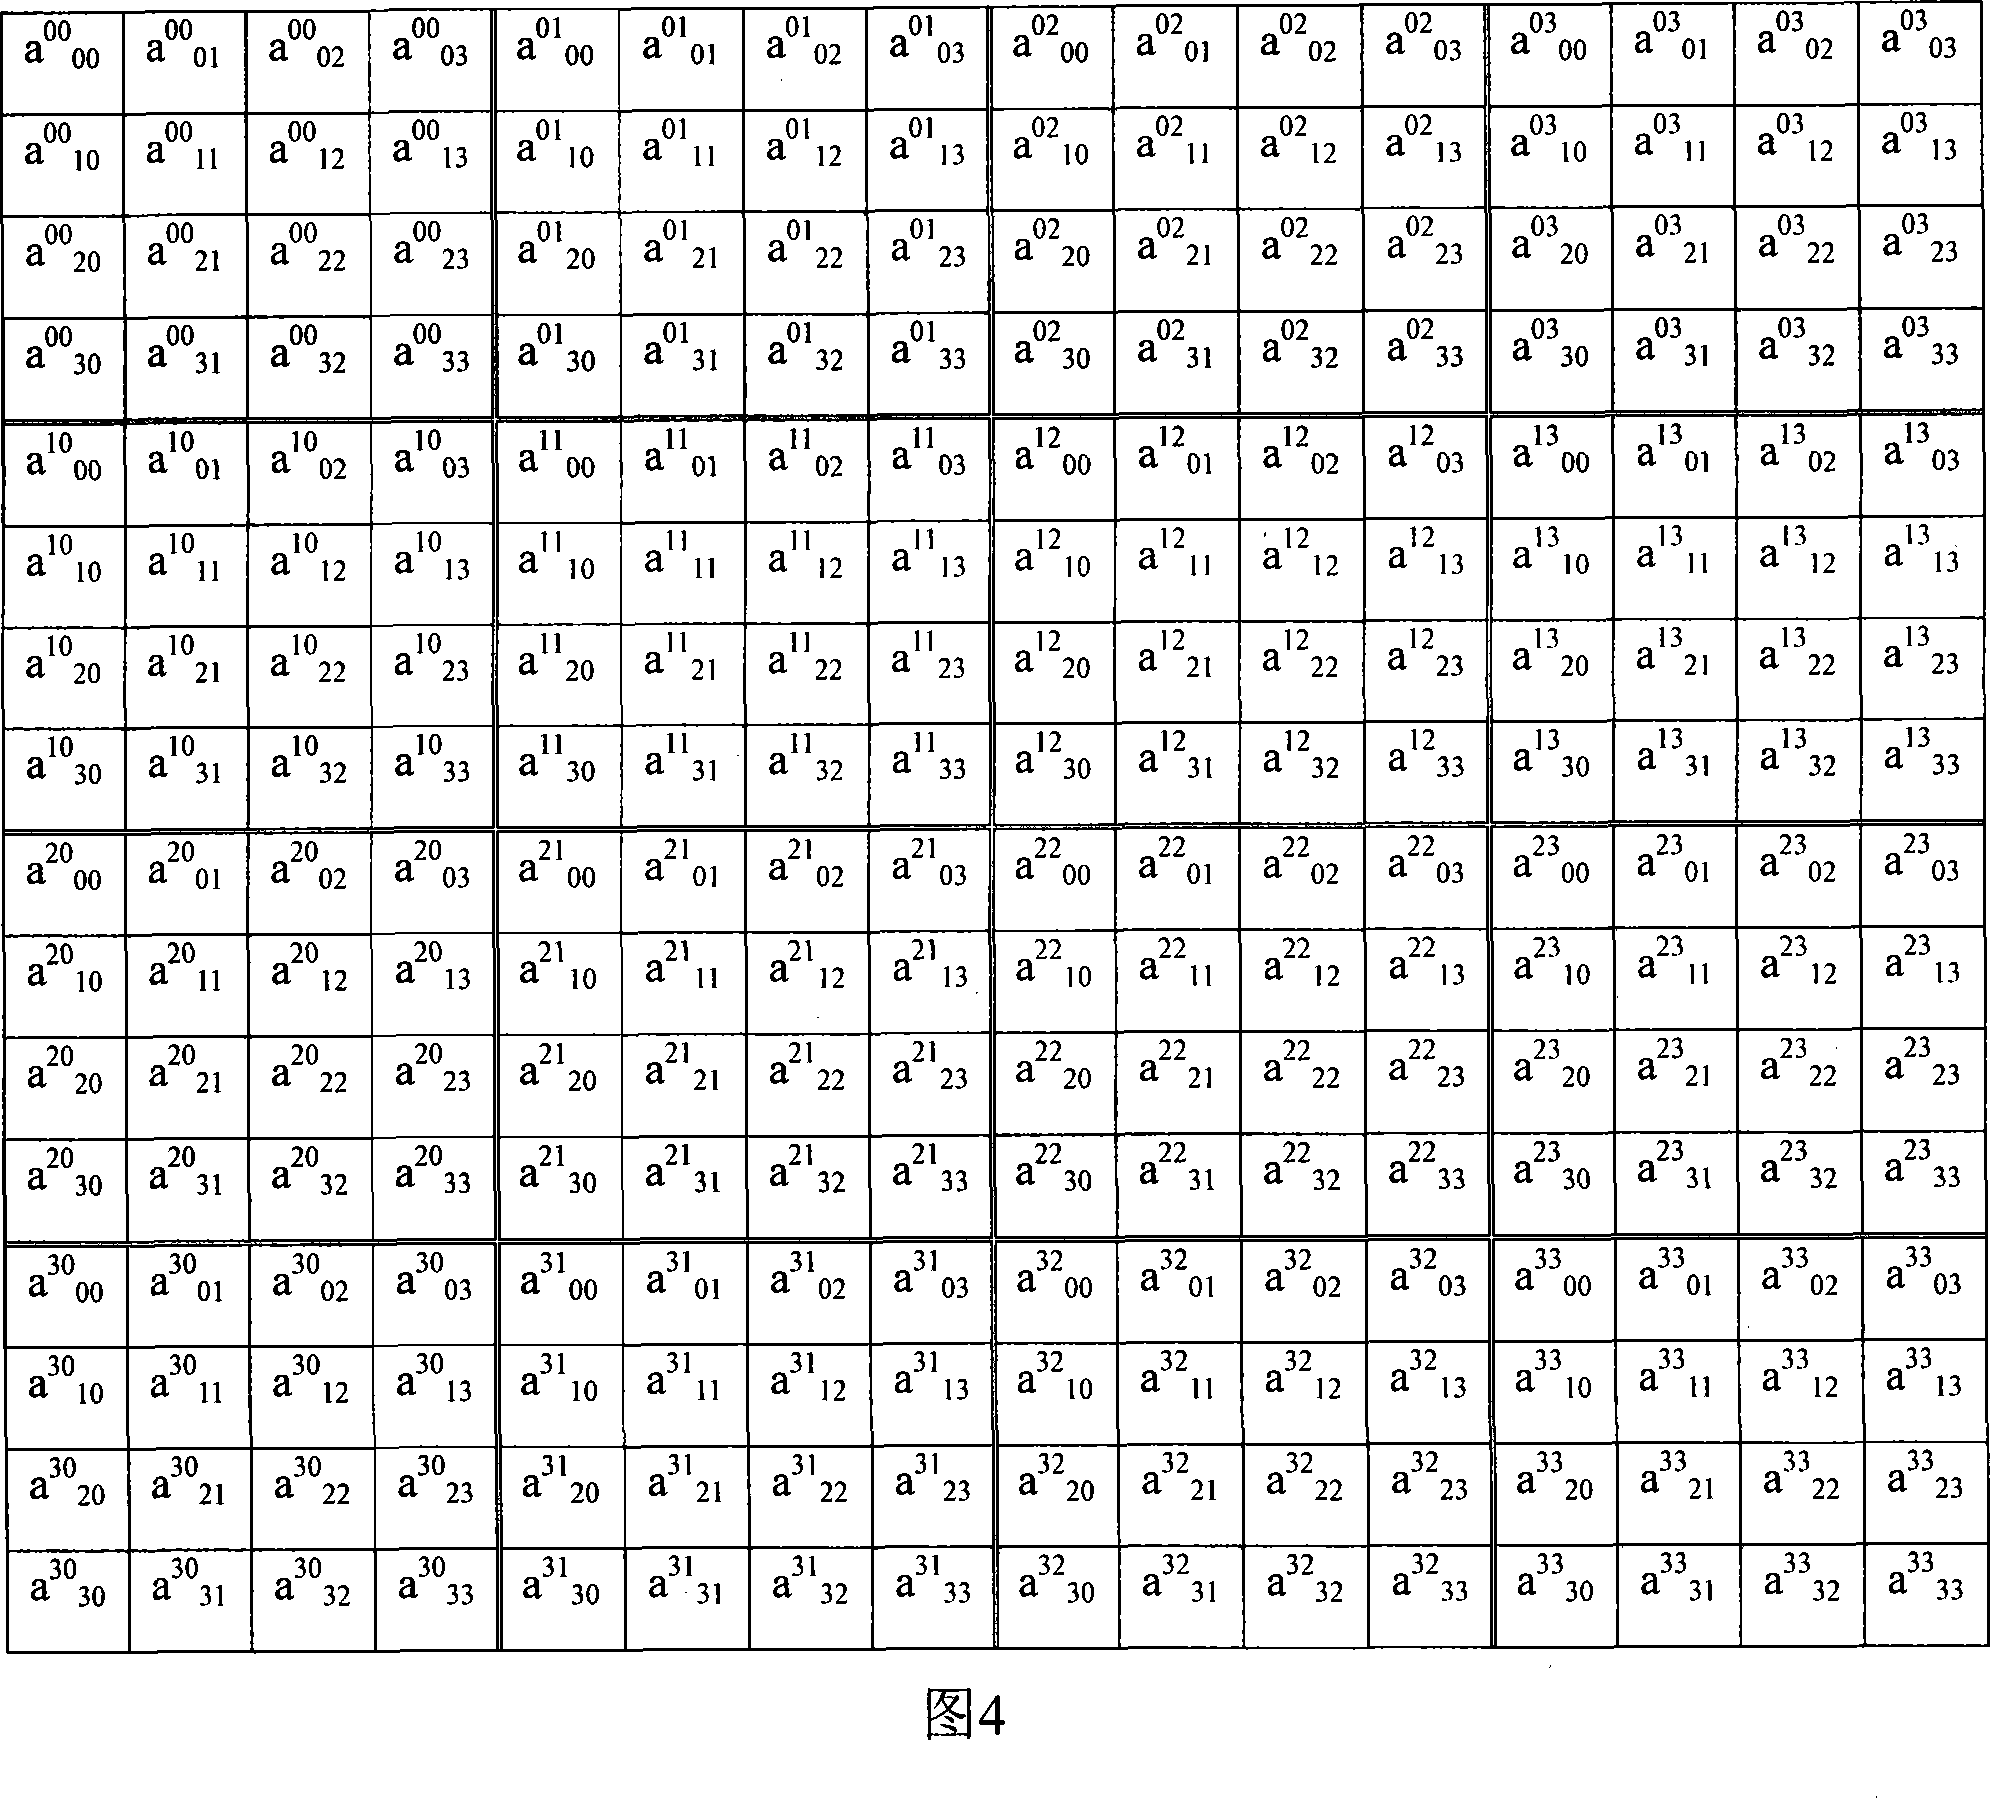 DCT-based resolution flexible image coding and decoding method